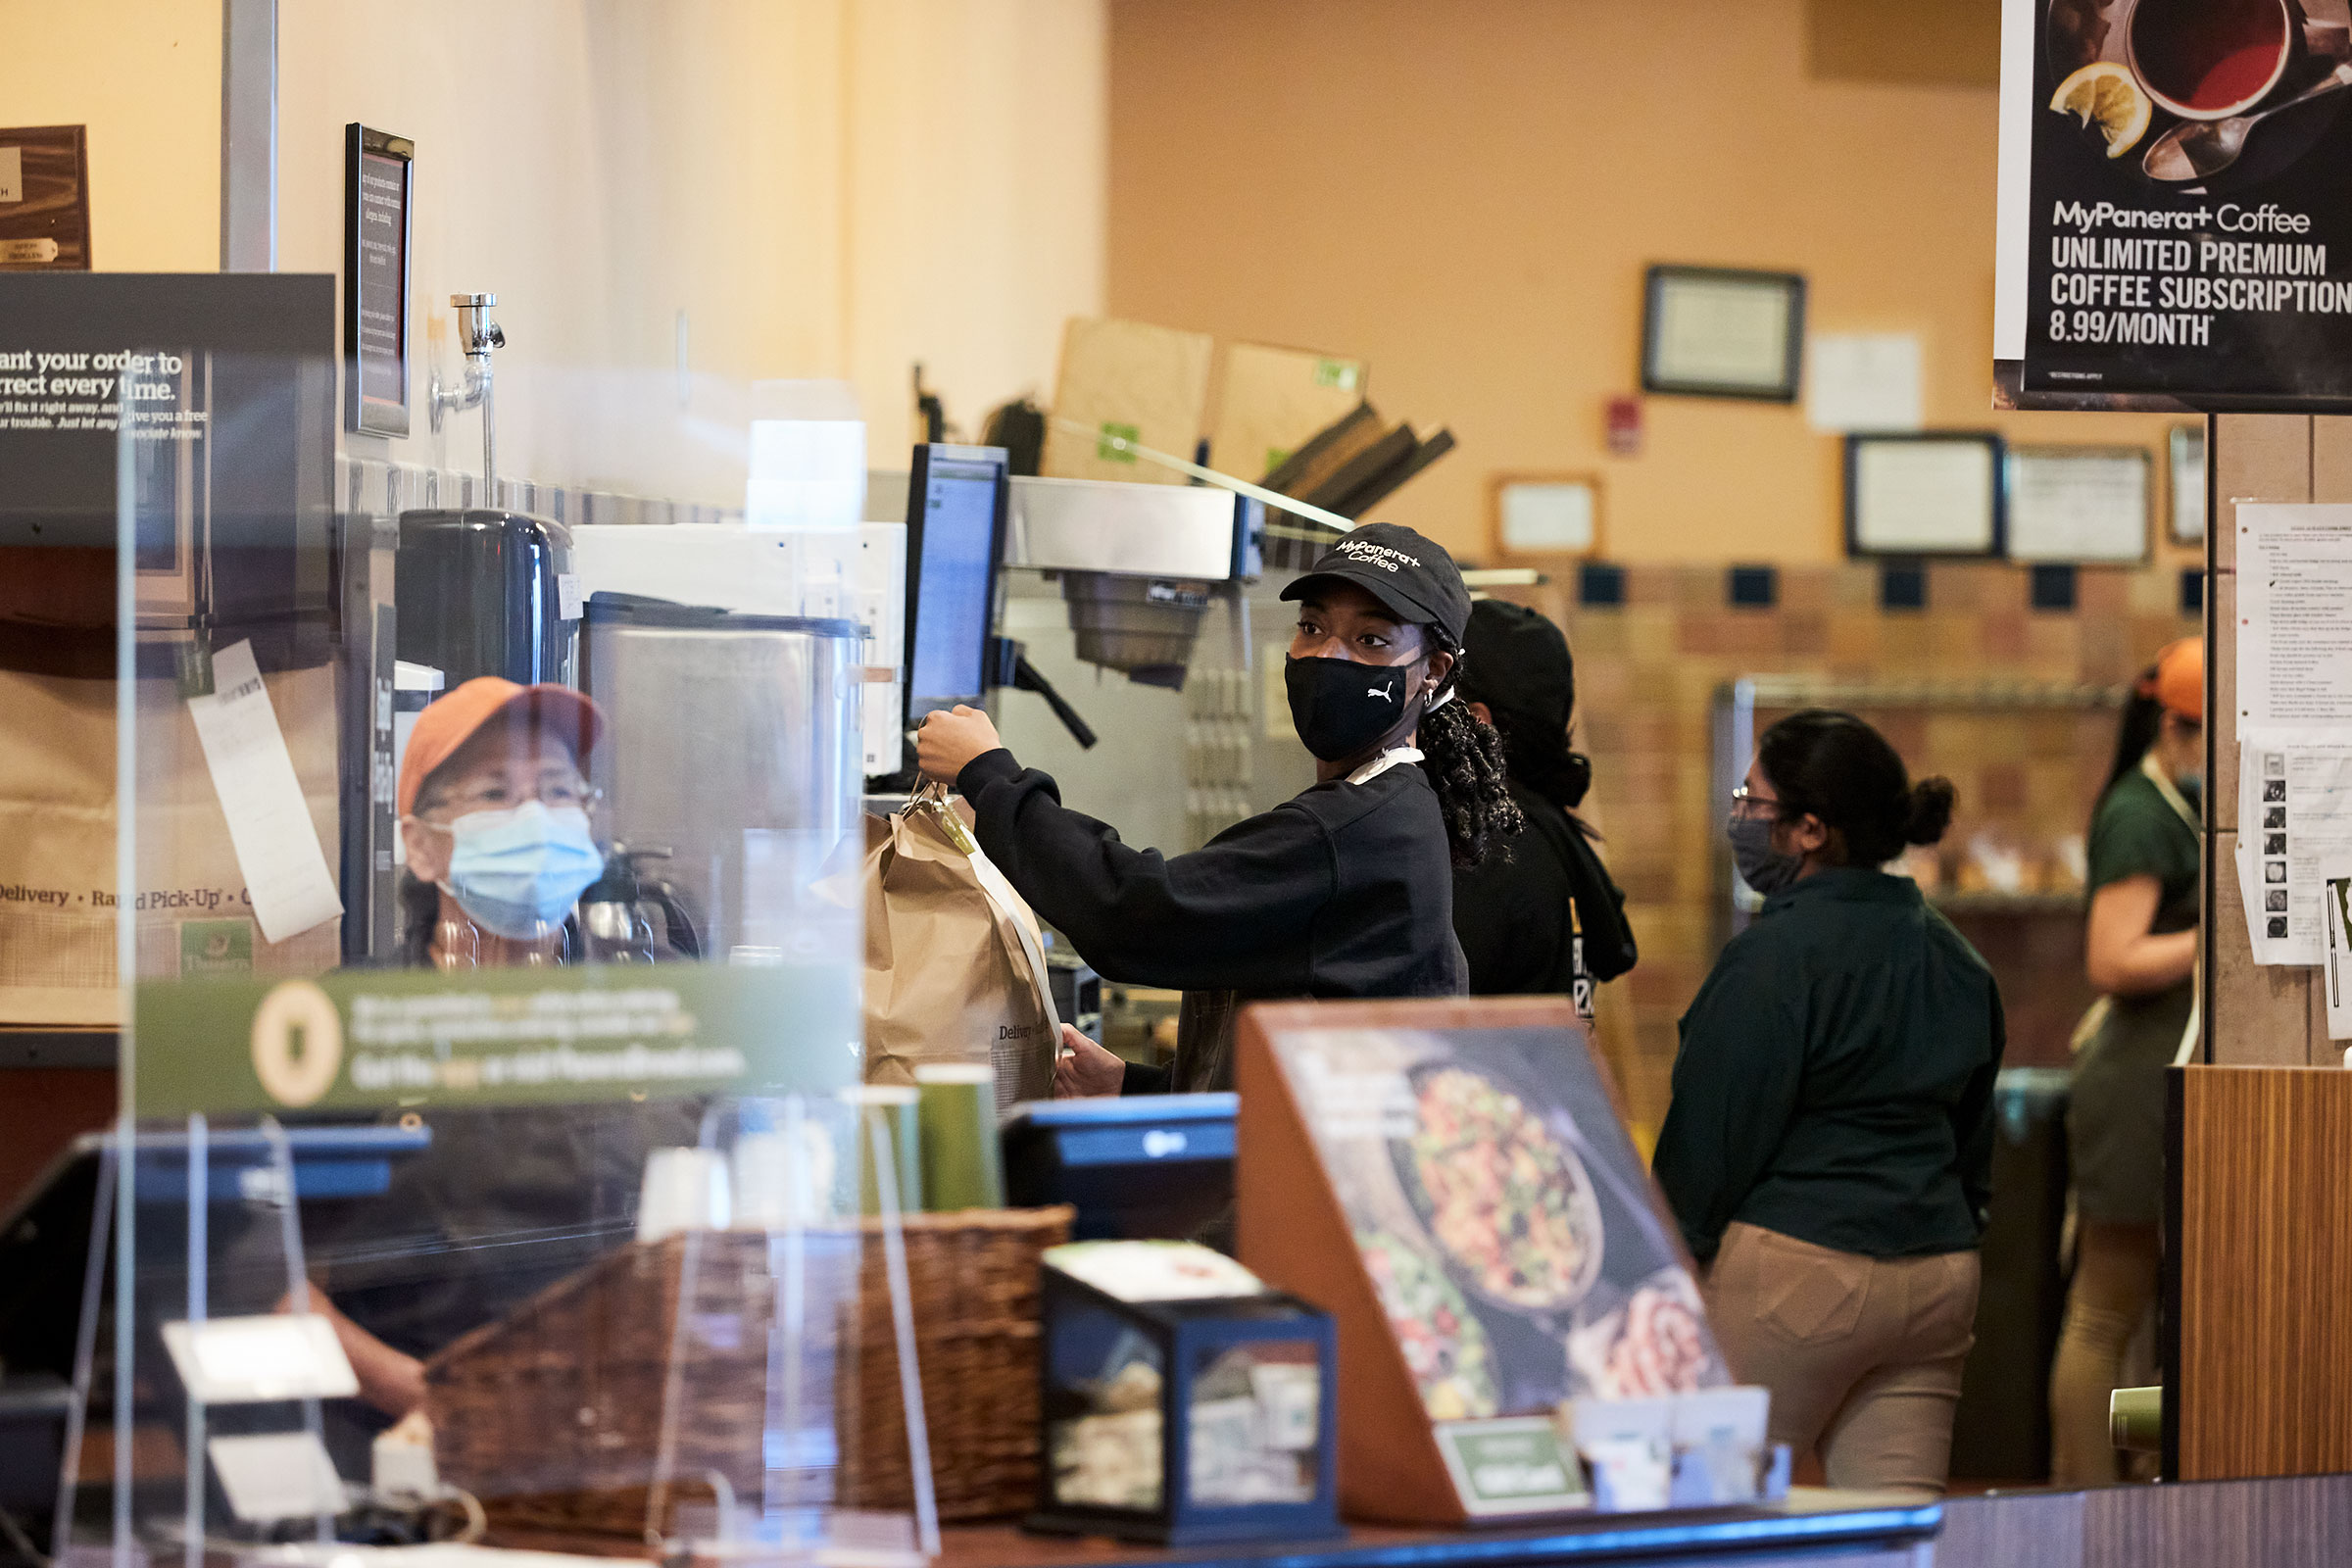 Joseph readies a takeout order at Panera Bread café in Bay Shore, N.Y. (Mohamed Sadek for TIME)